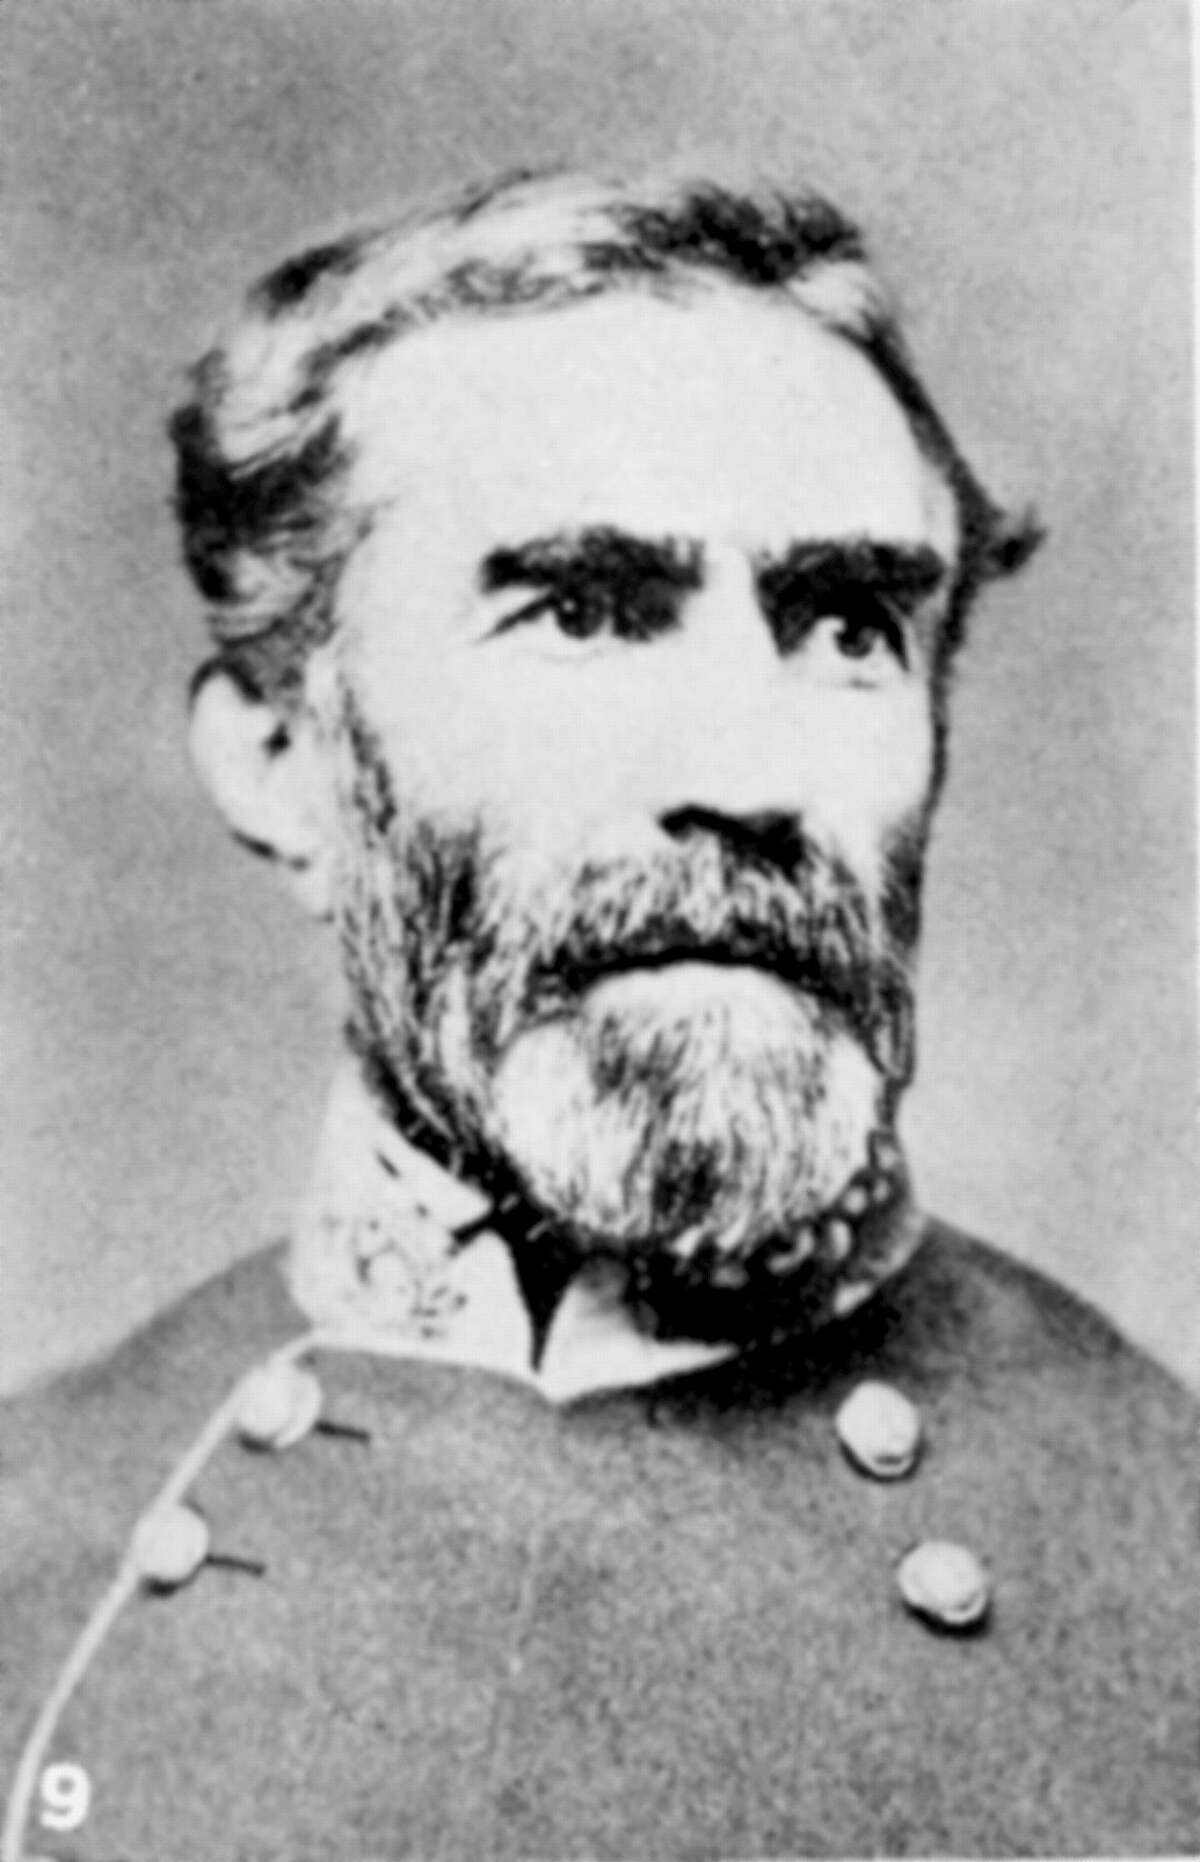 UNSPECIFIED - CIRCA 1865: Braxton Bragg (1817-1876) American soldier. General in Confederate (southern) army during American Civil War 1861-1865. (Photo by Universal History Archive/Getty Images)